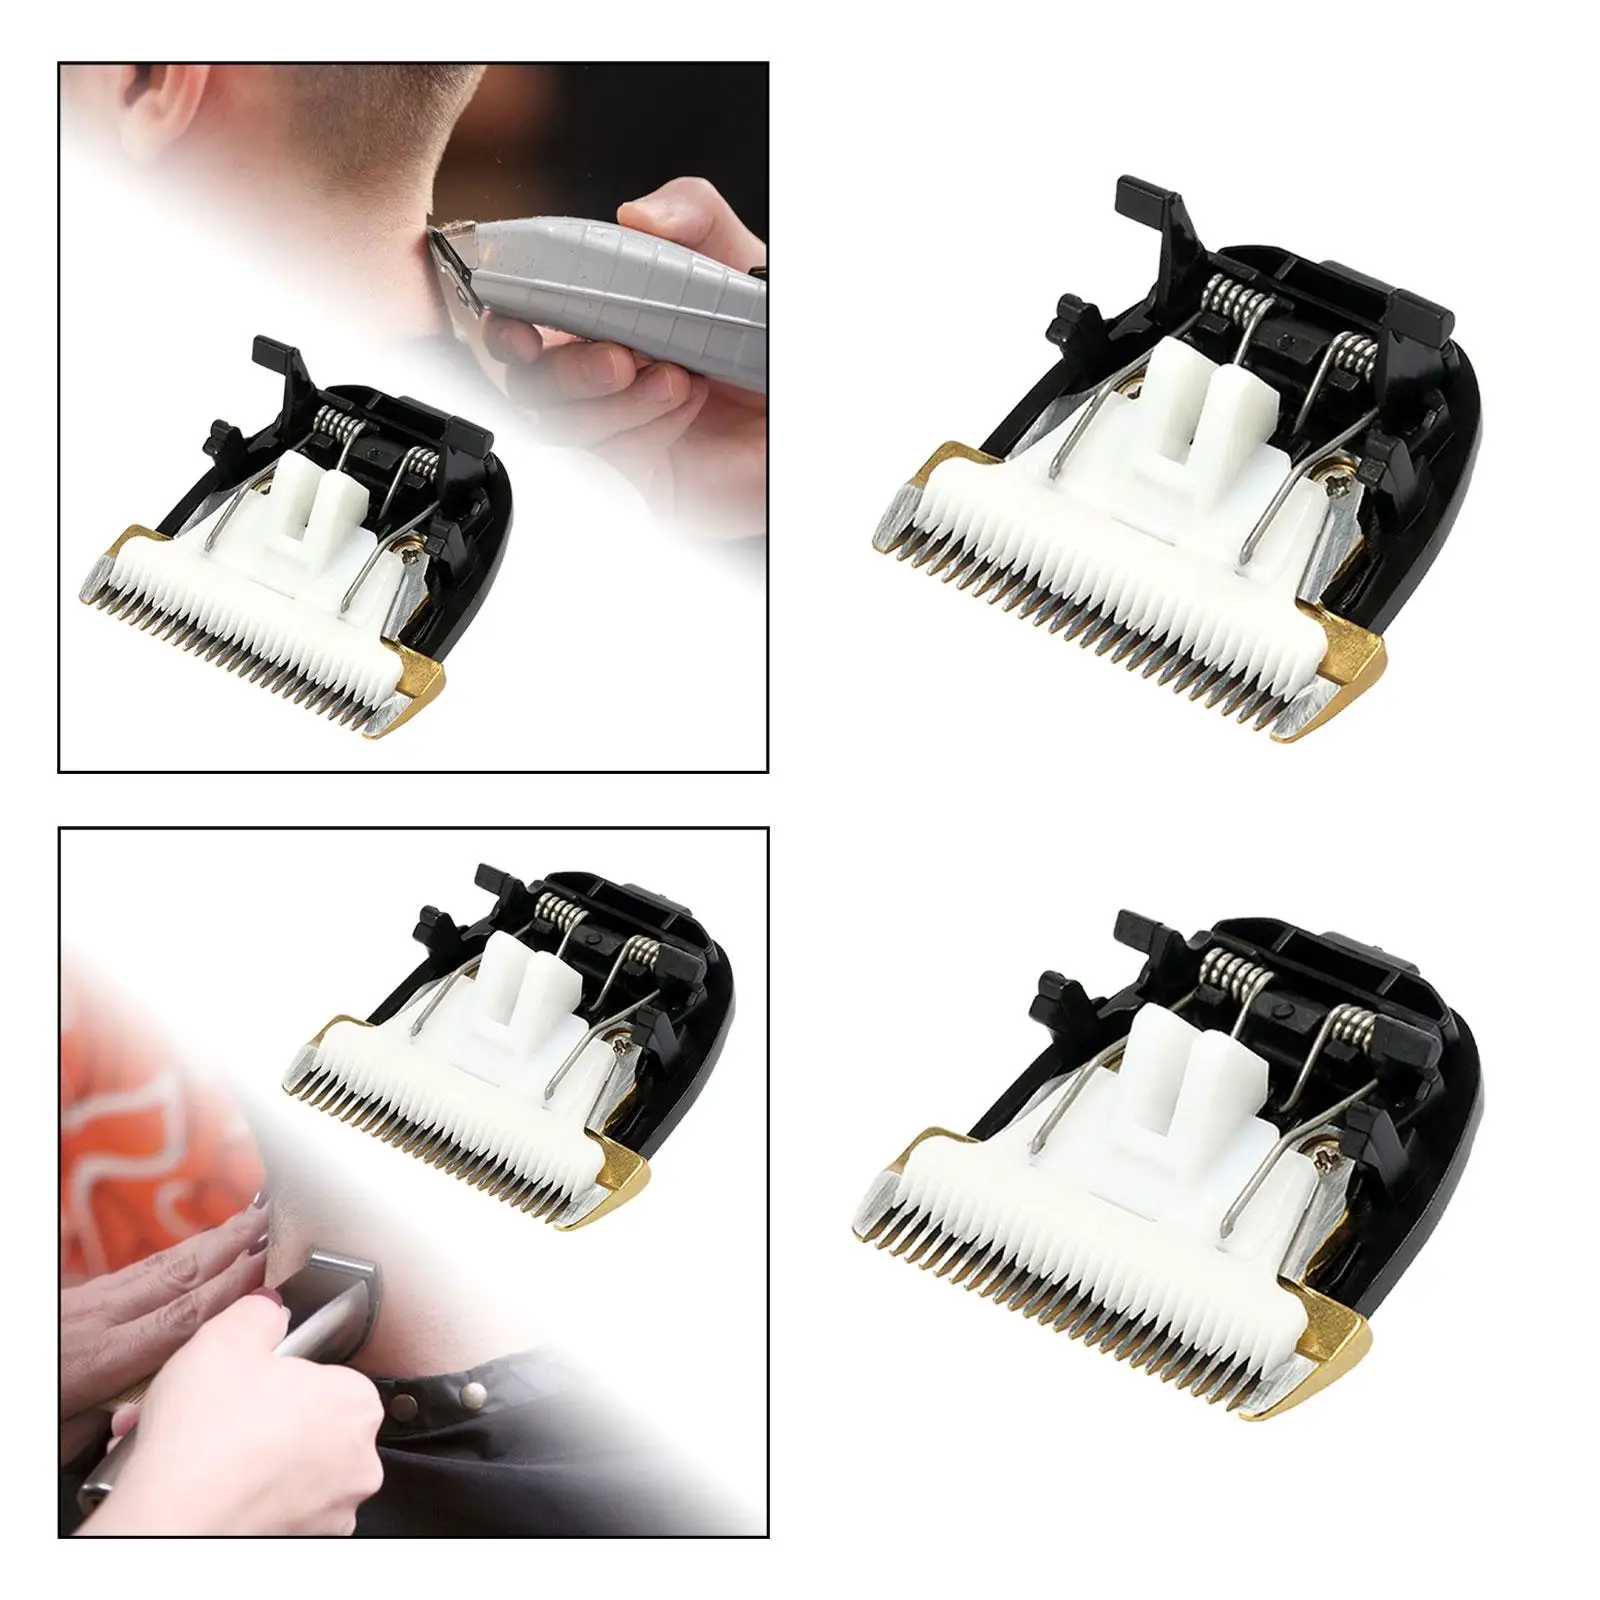 Blade Clipper Head Professional Replace Tool Trimmer Heads for Grooming Home